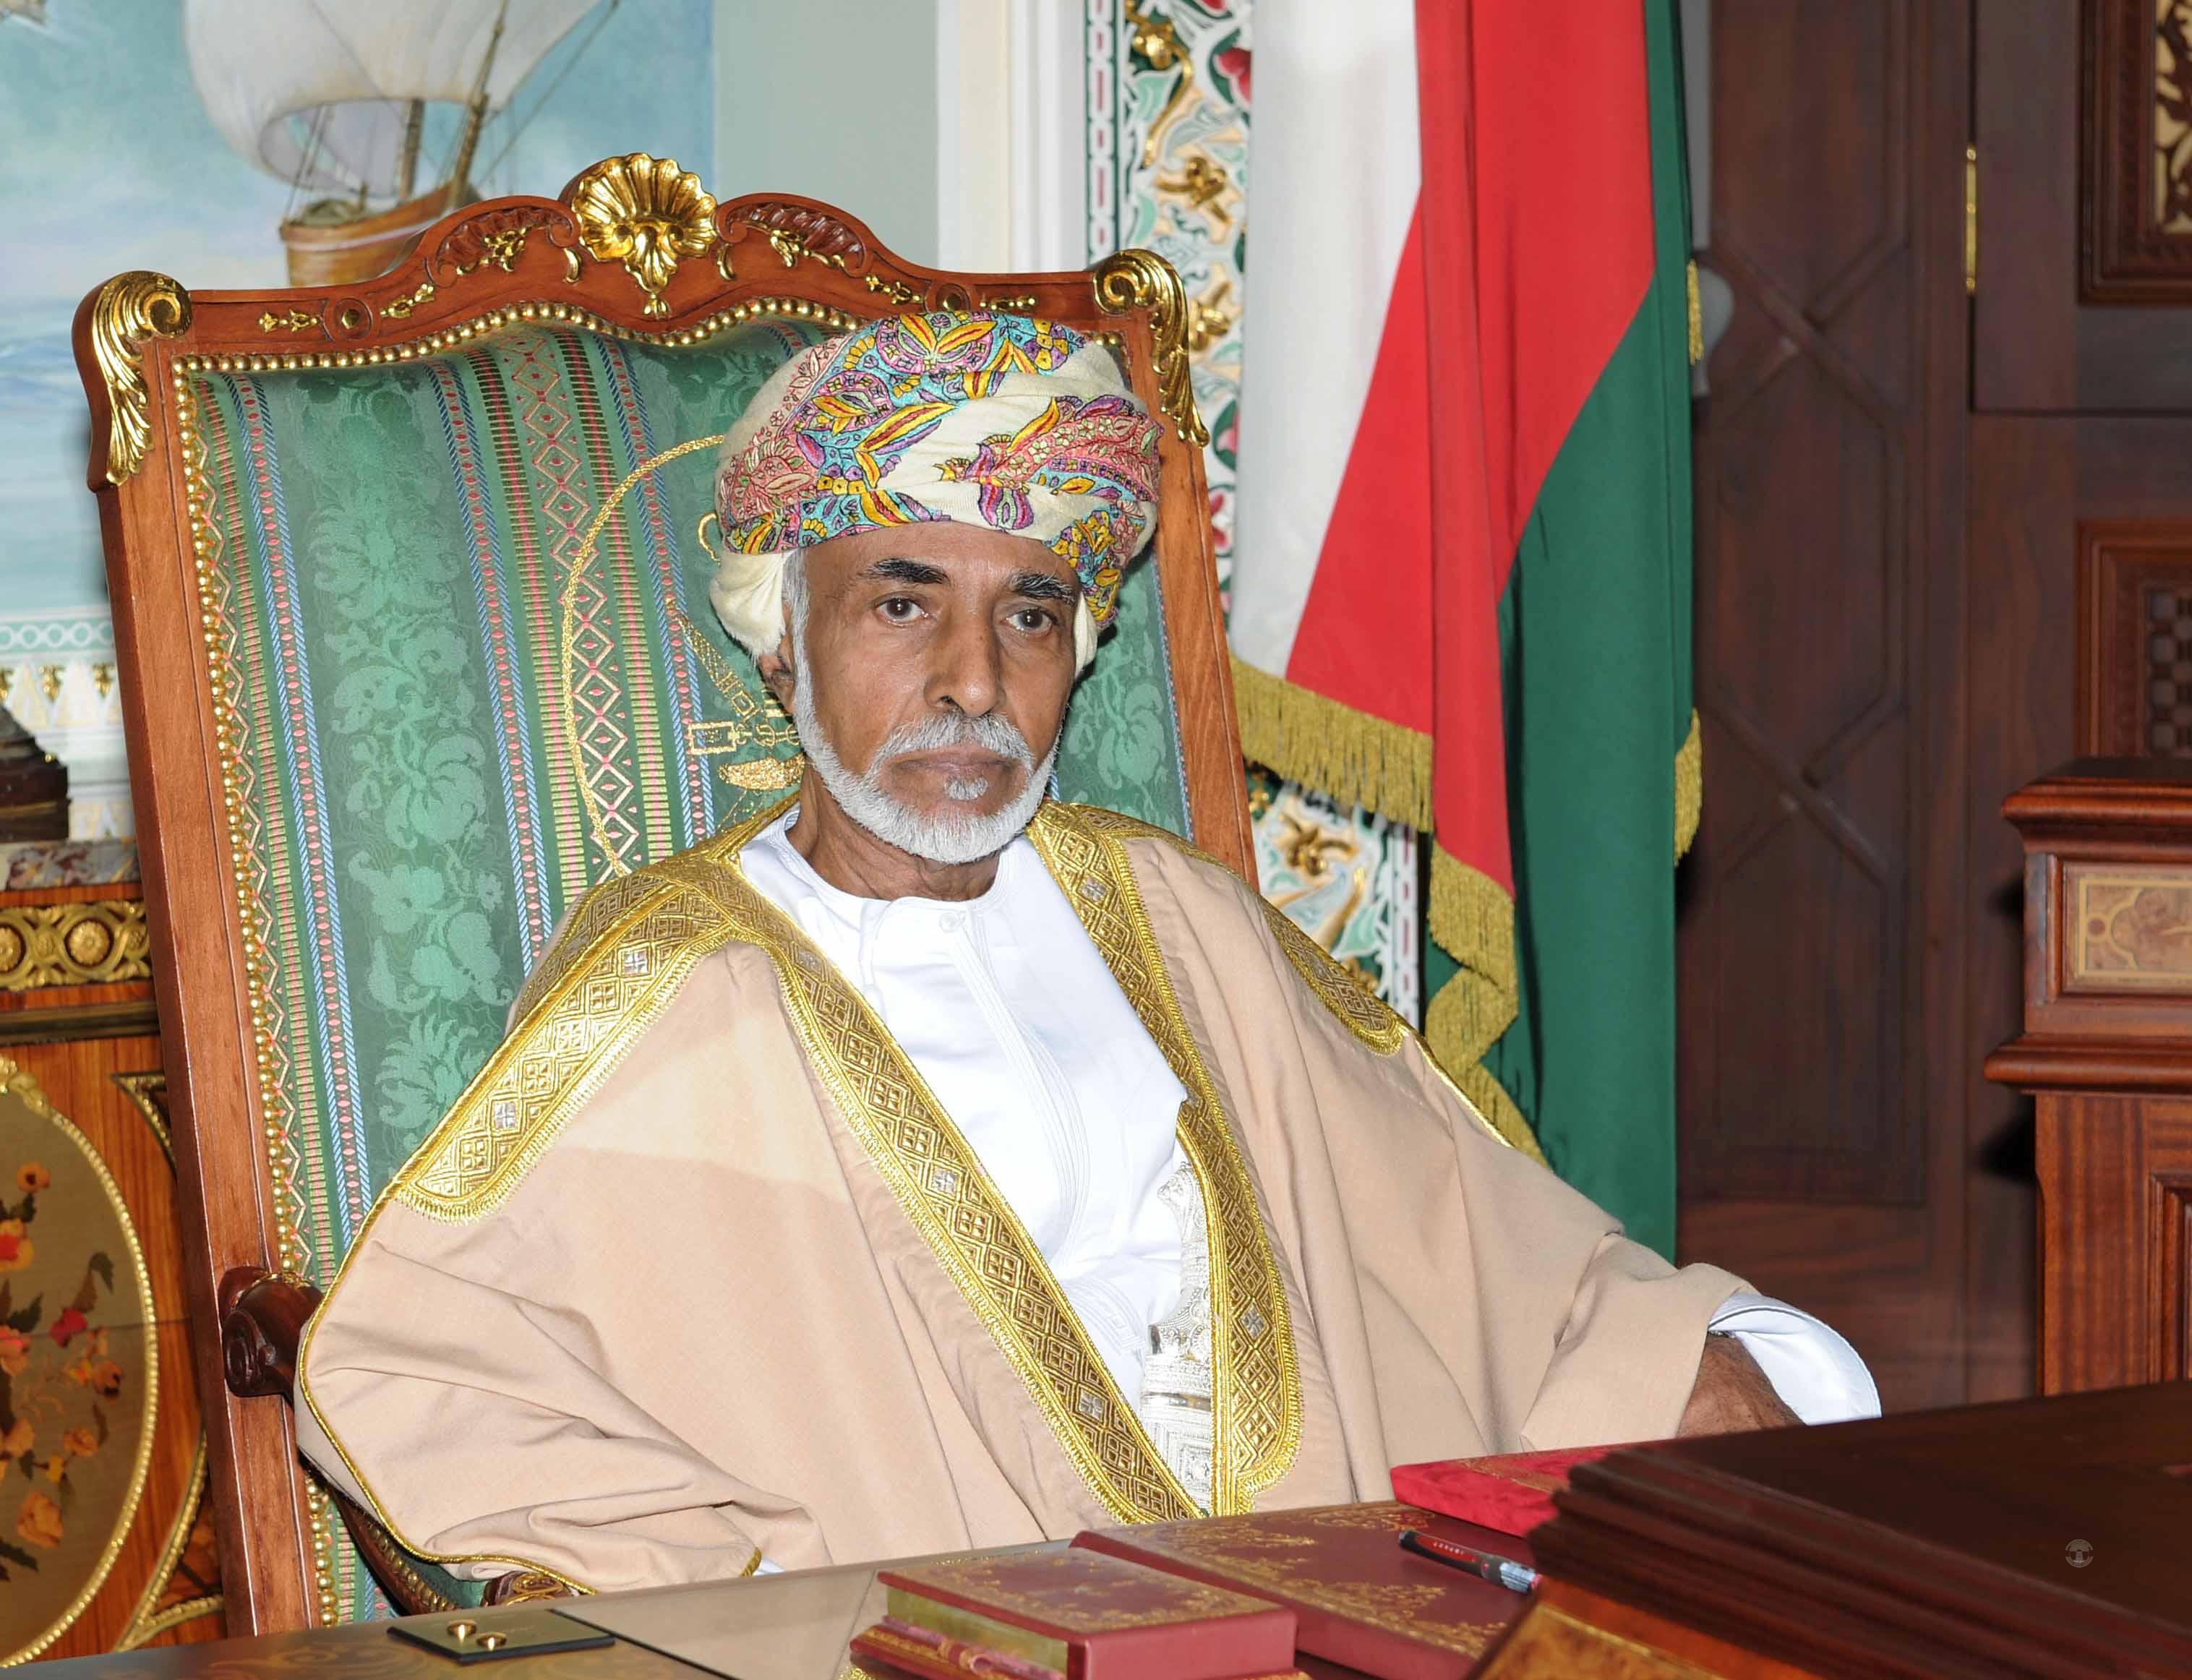 His Majesty Sultan Qaboos sends greetings to Austria